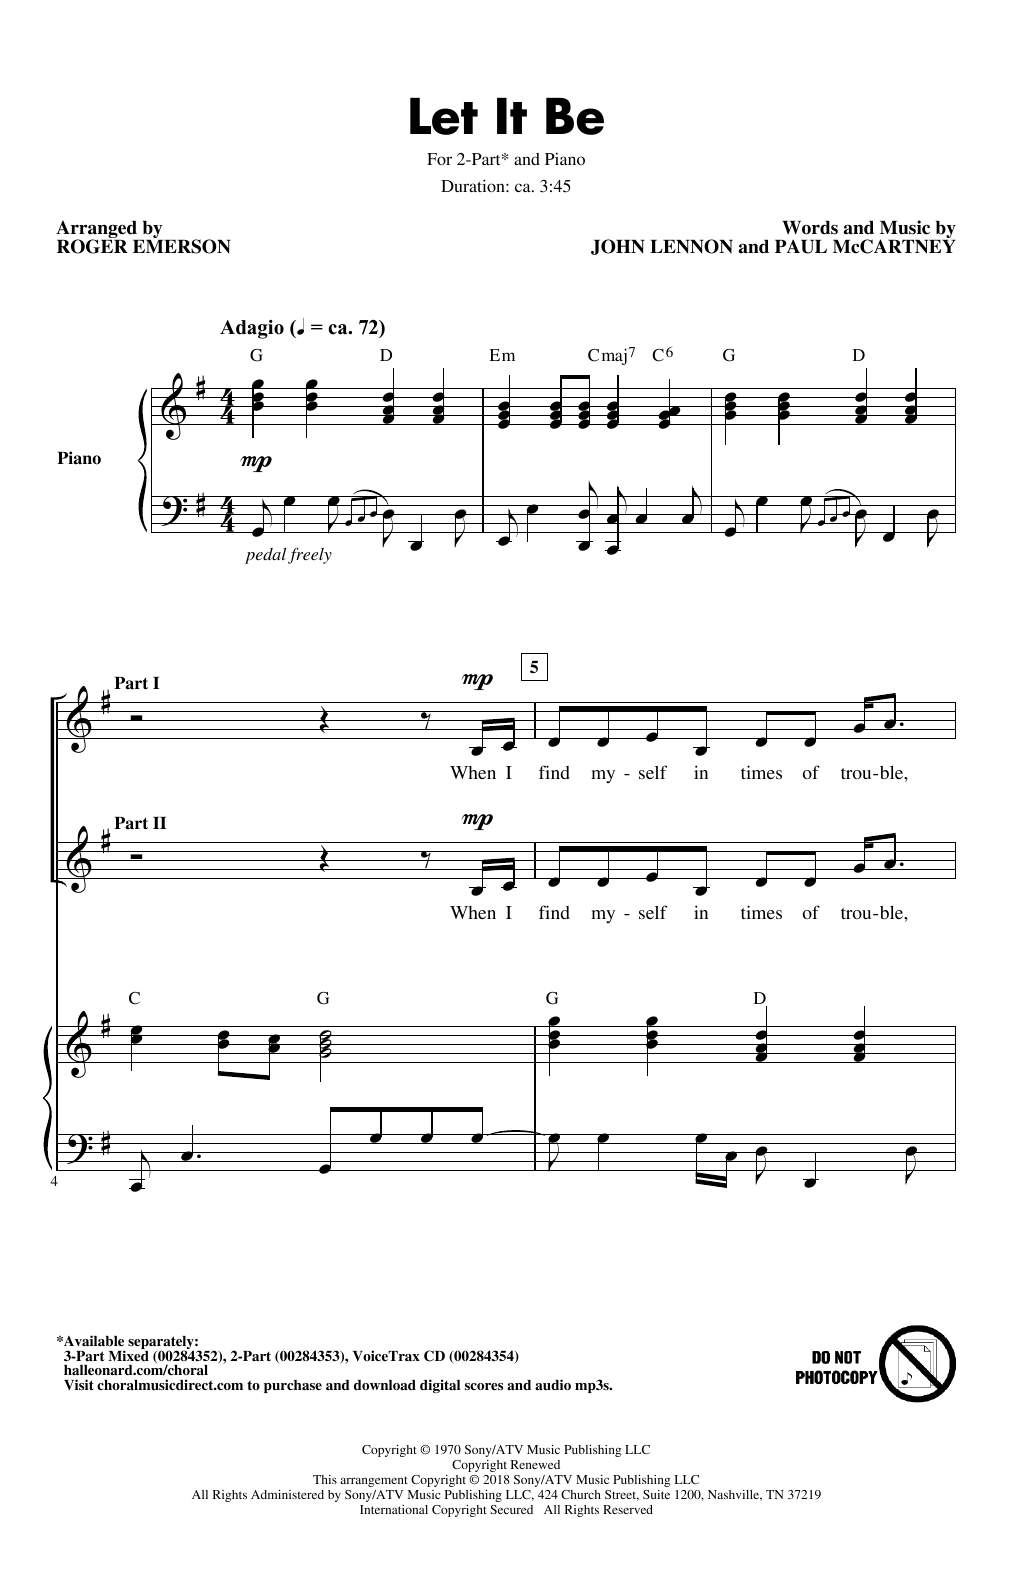 Download The Beatles Let It Be (arr. Roger Emerson) Sheet Music